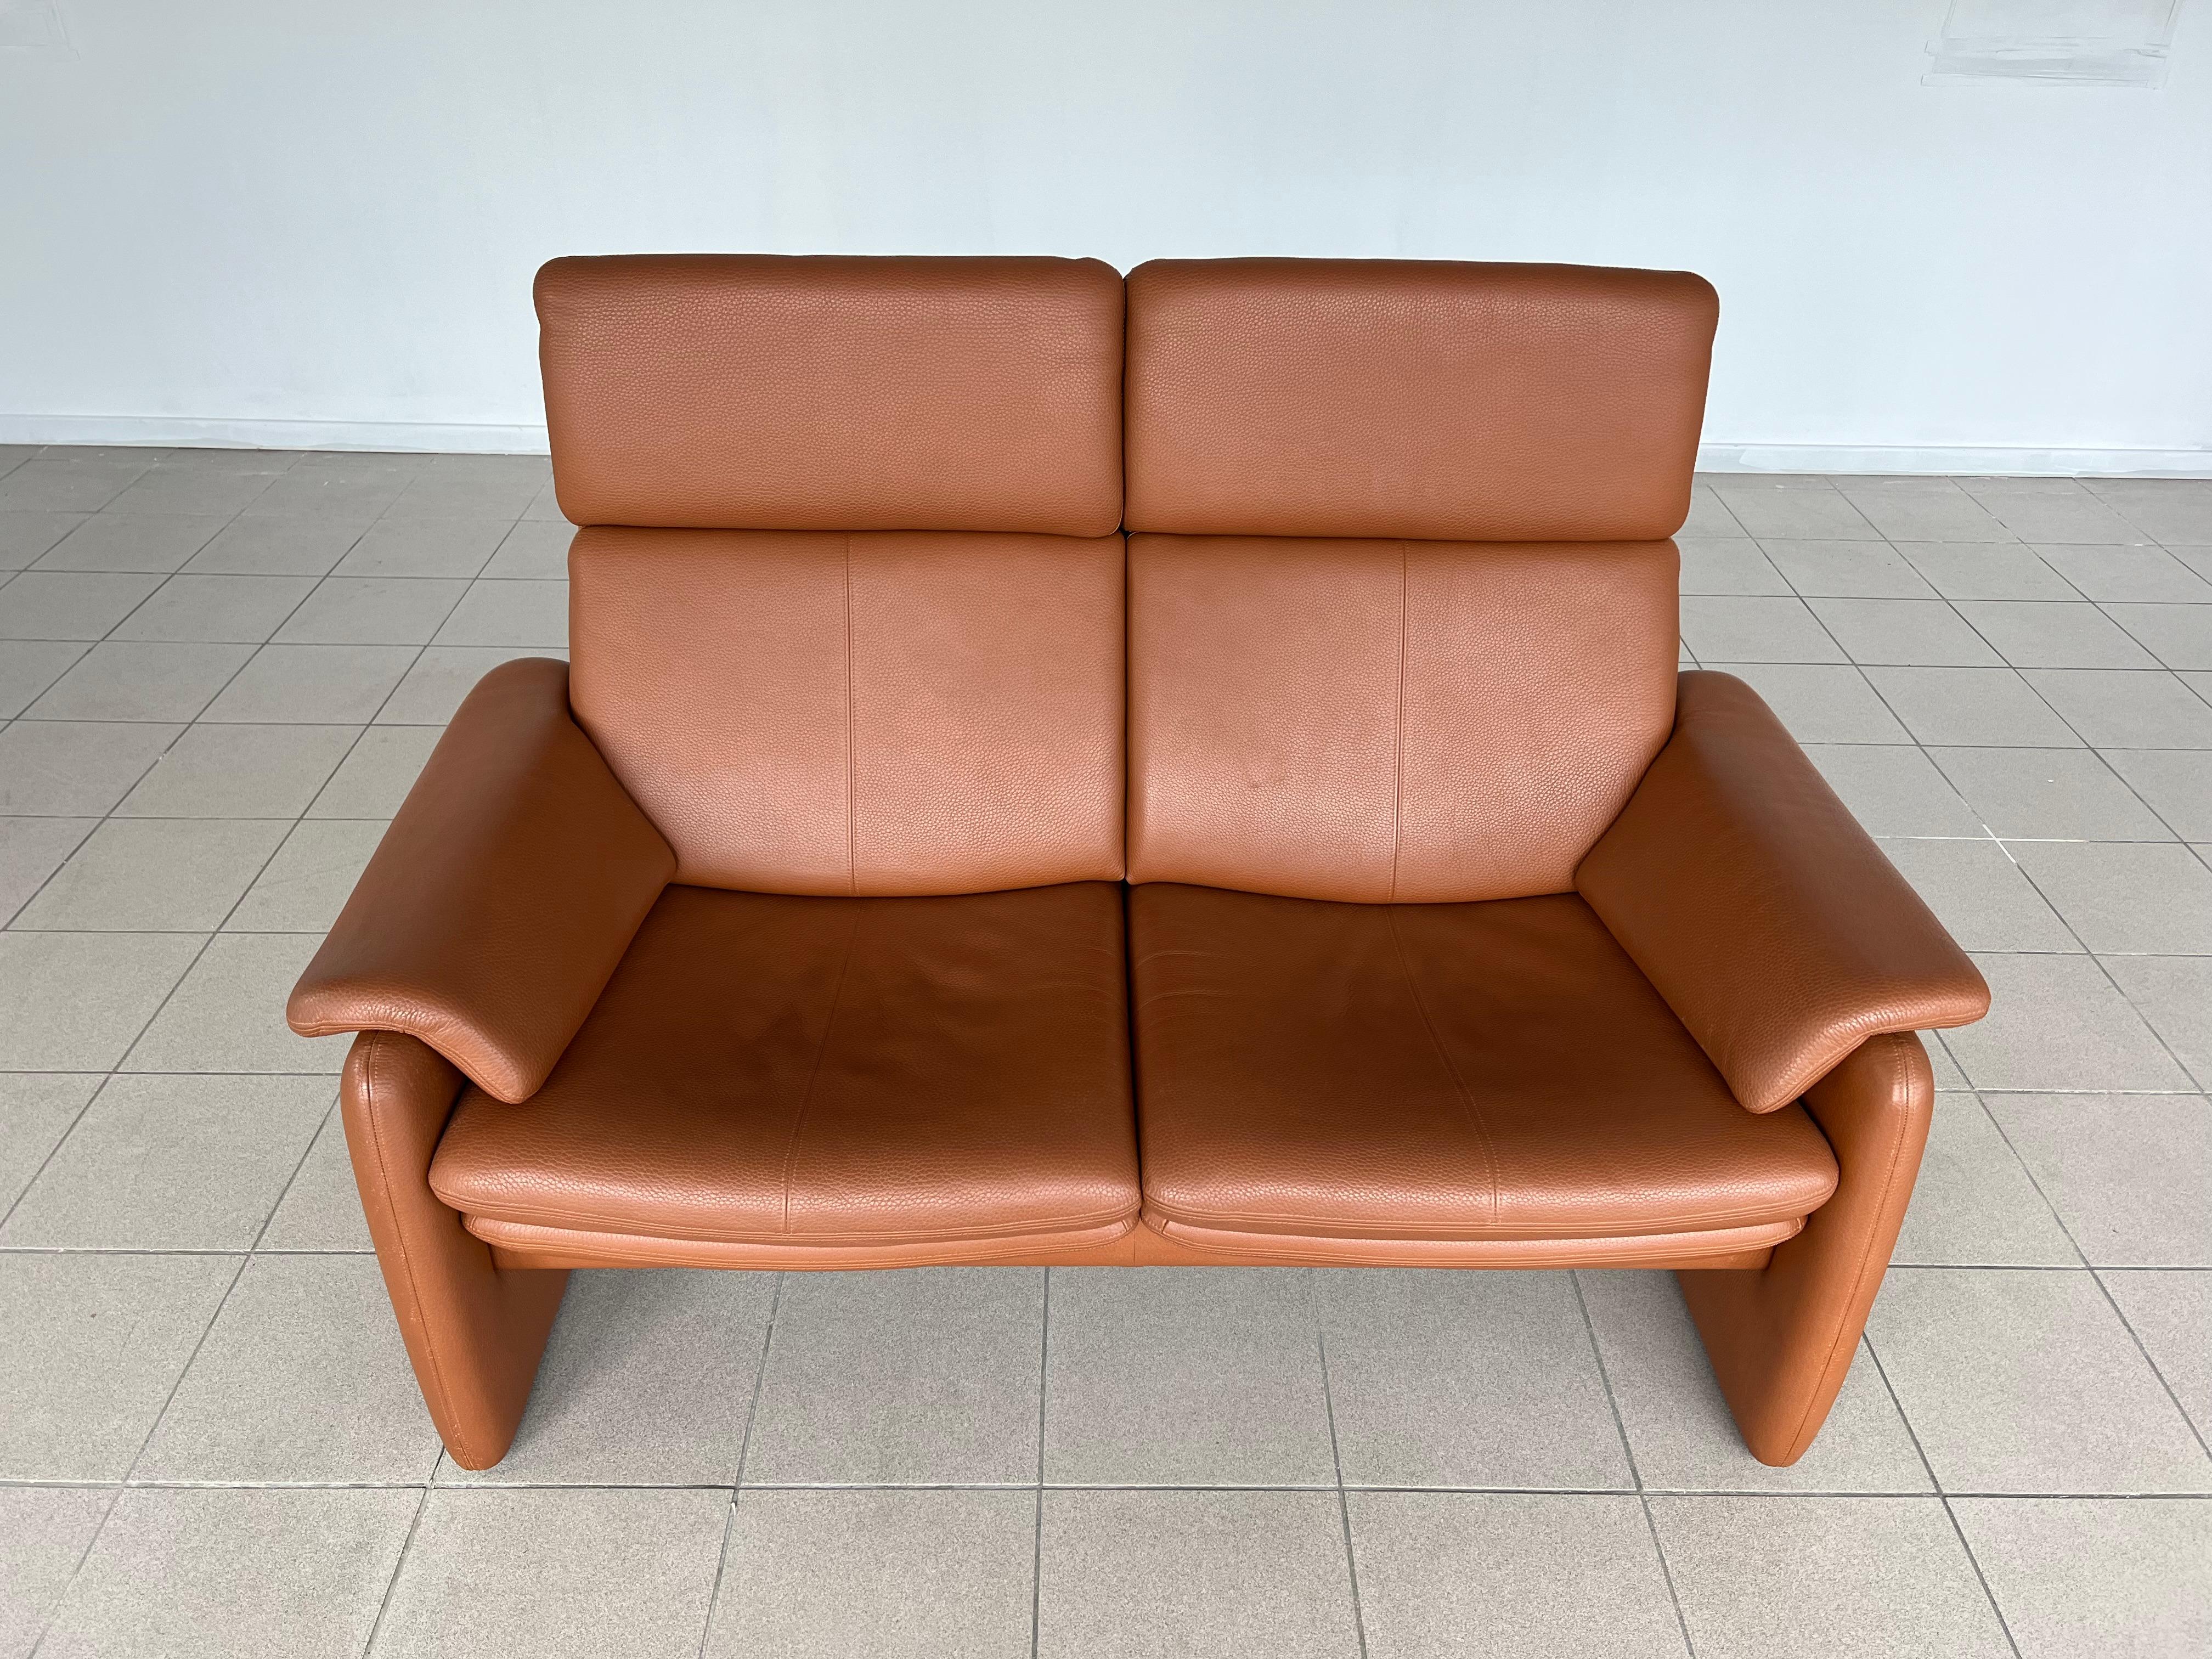 Original Modern Two-Seat Leather Designer Couch Sofa by Erpo In Good Condition For Sale In Bridgeport, CT